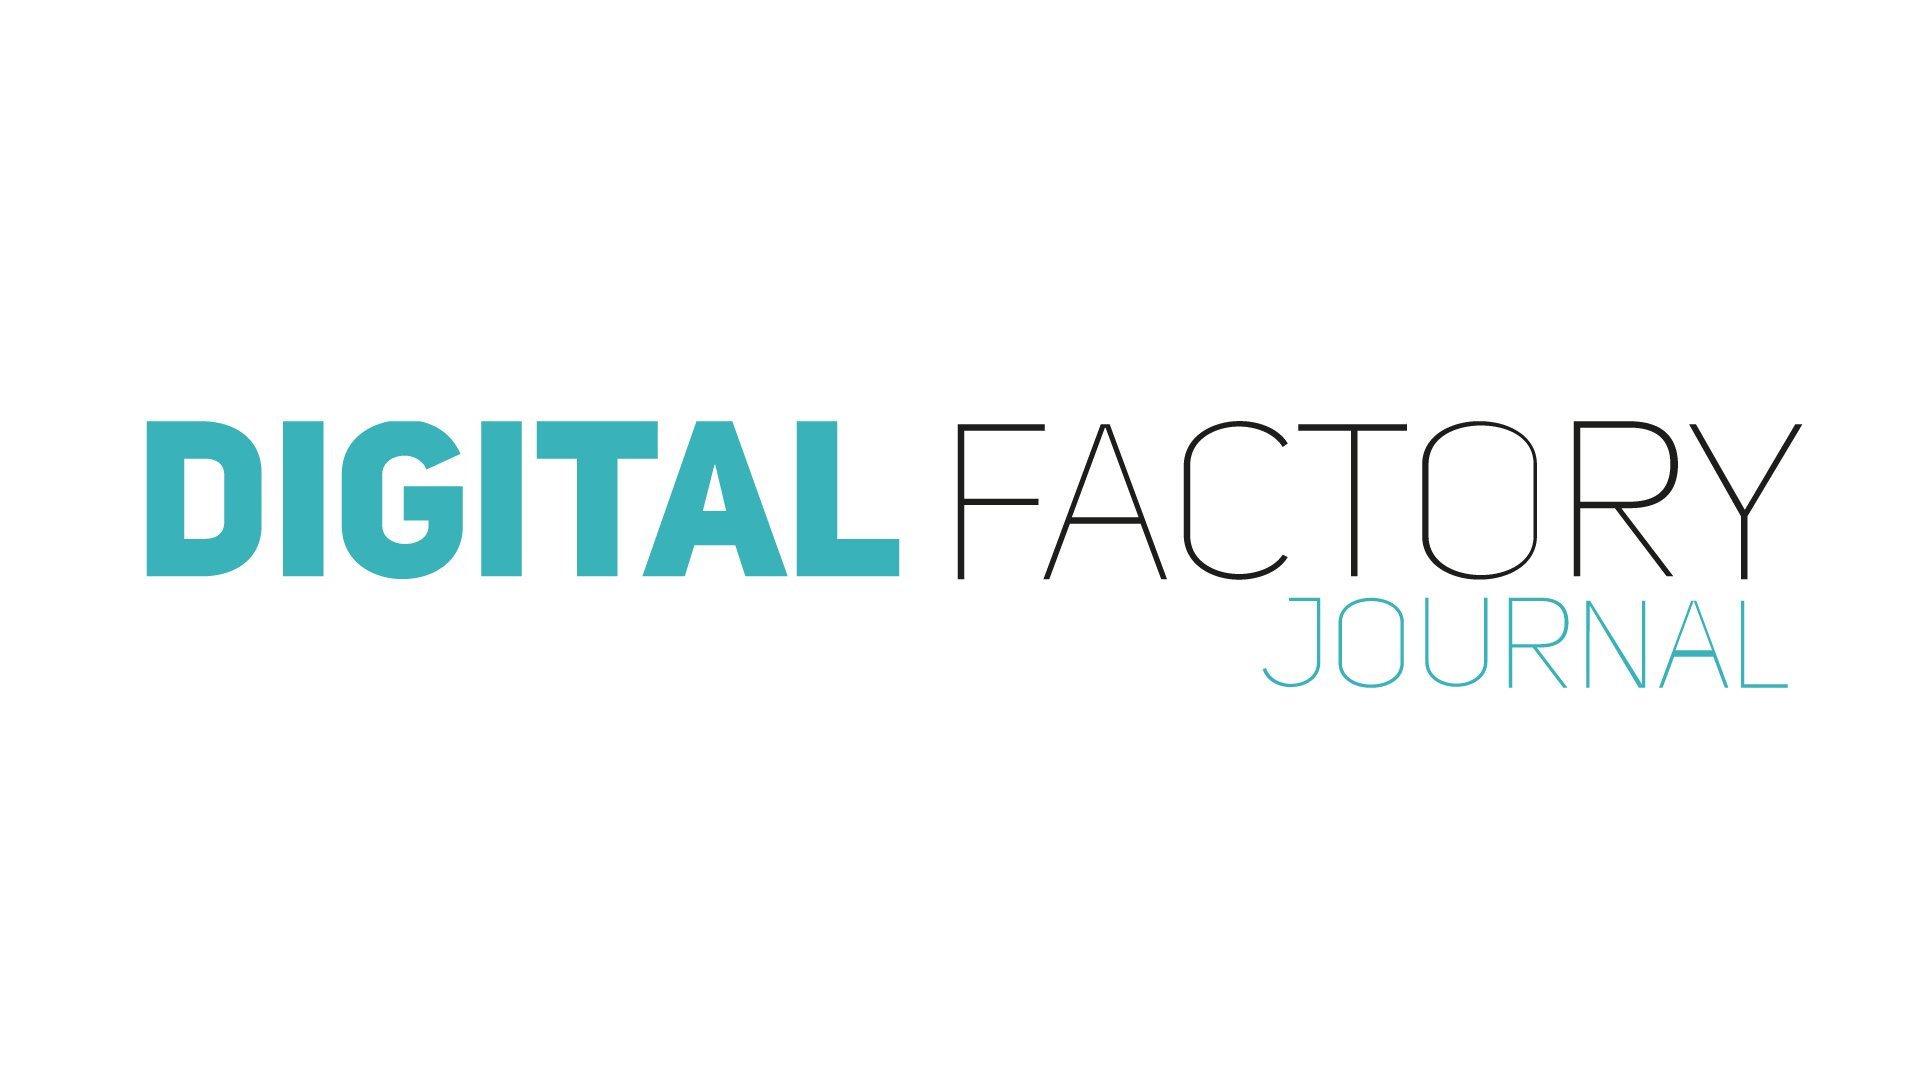 The logo of Digital Factory Journal in blue and black.